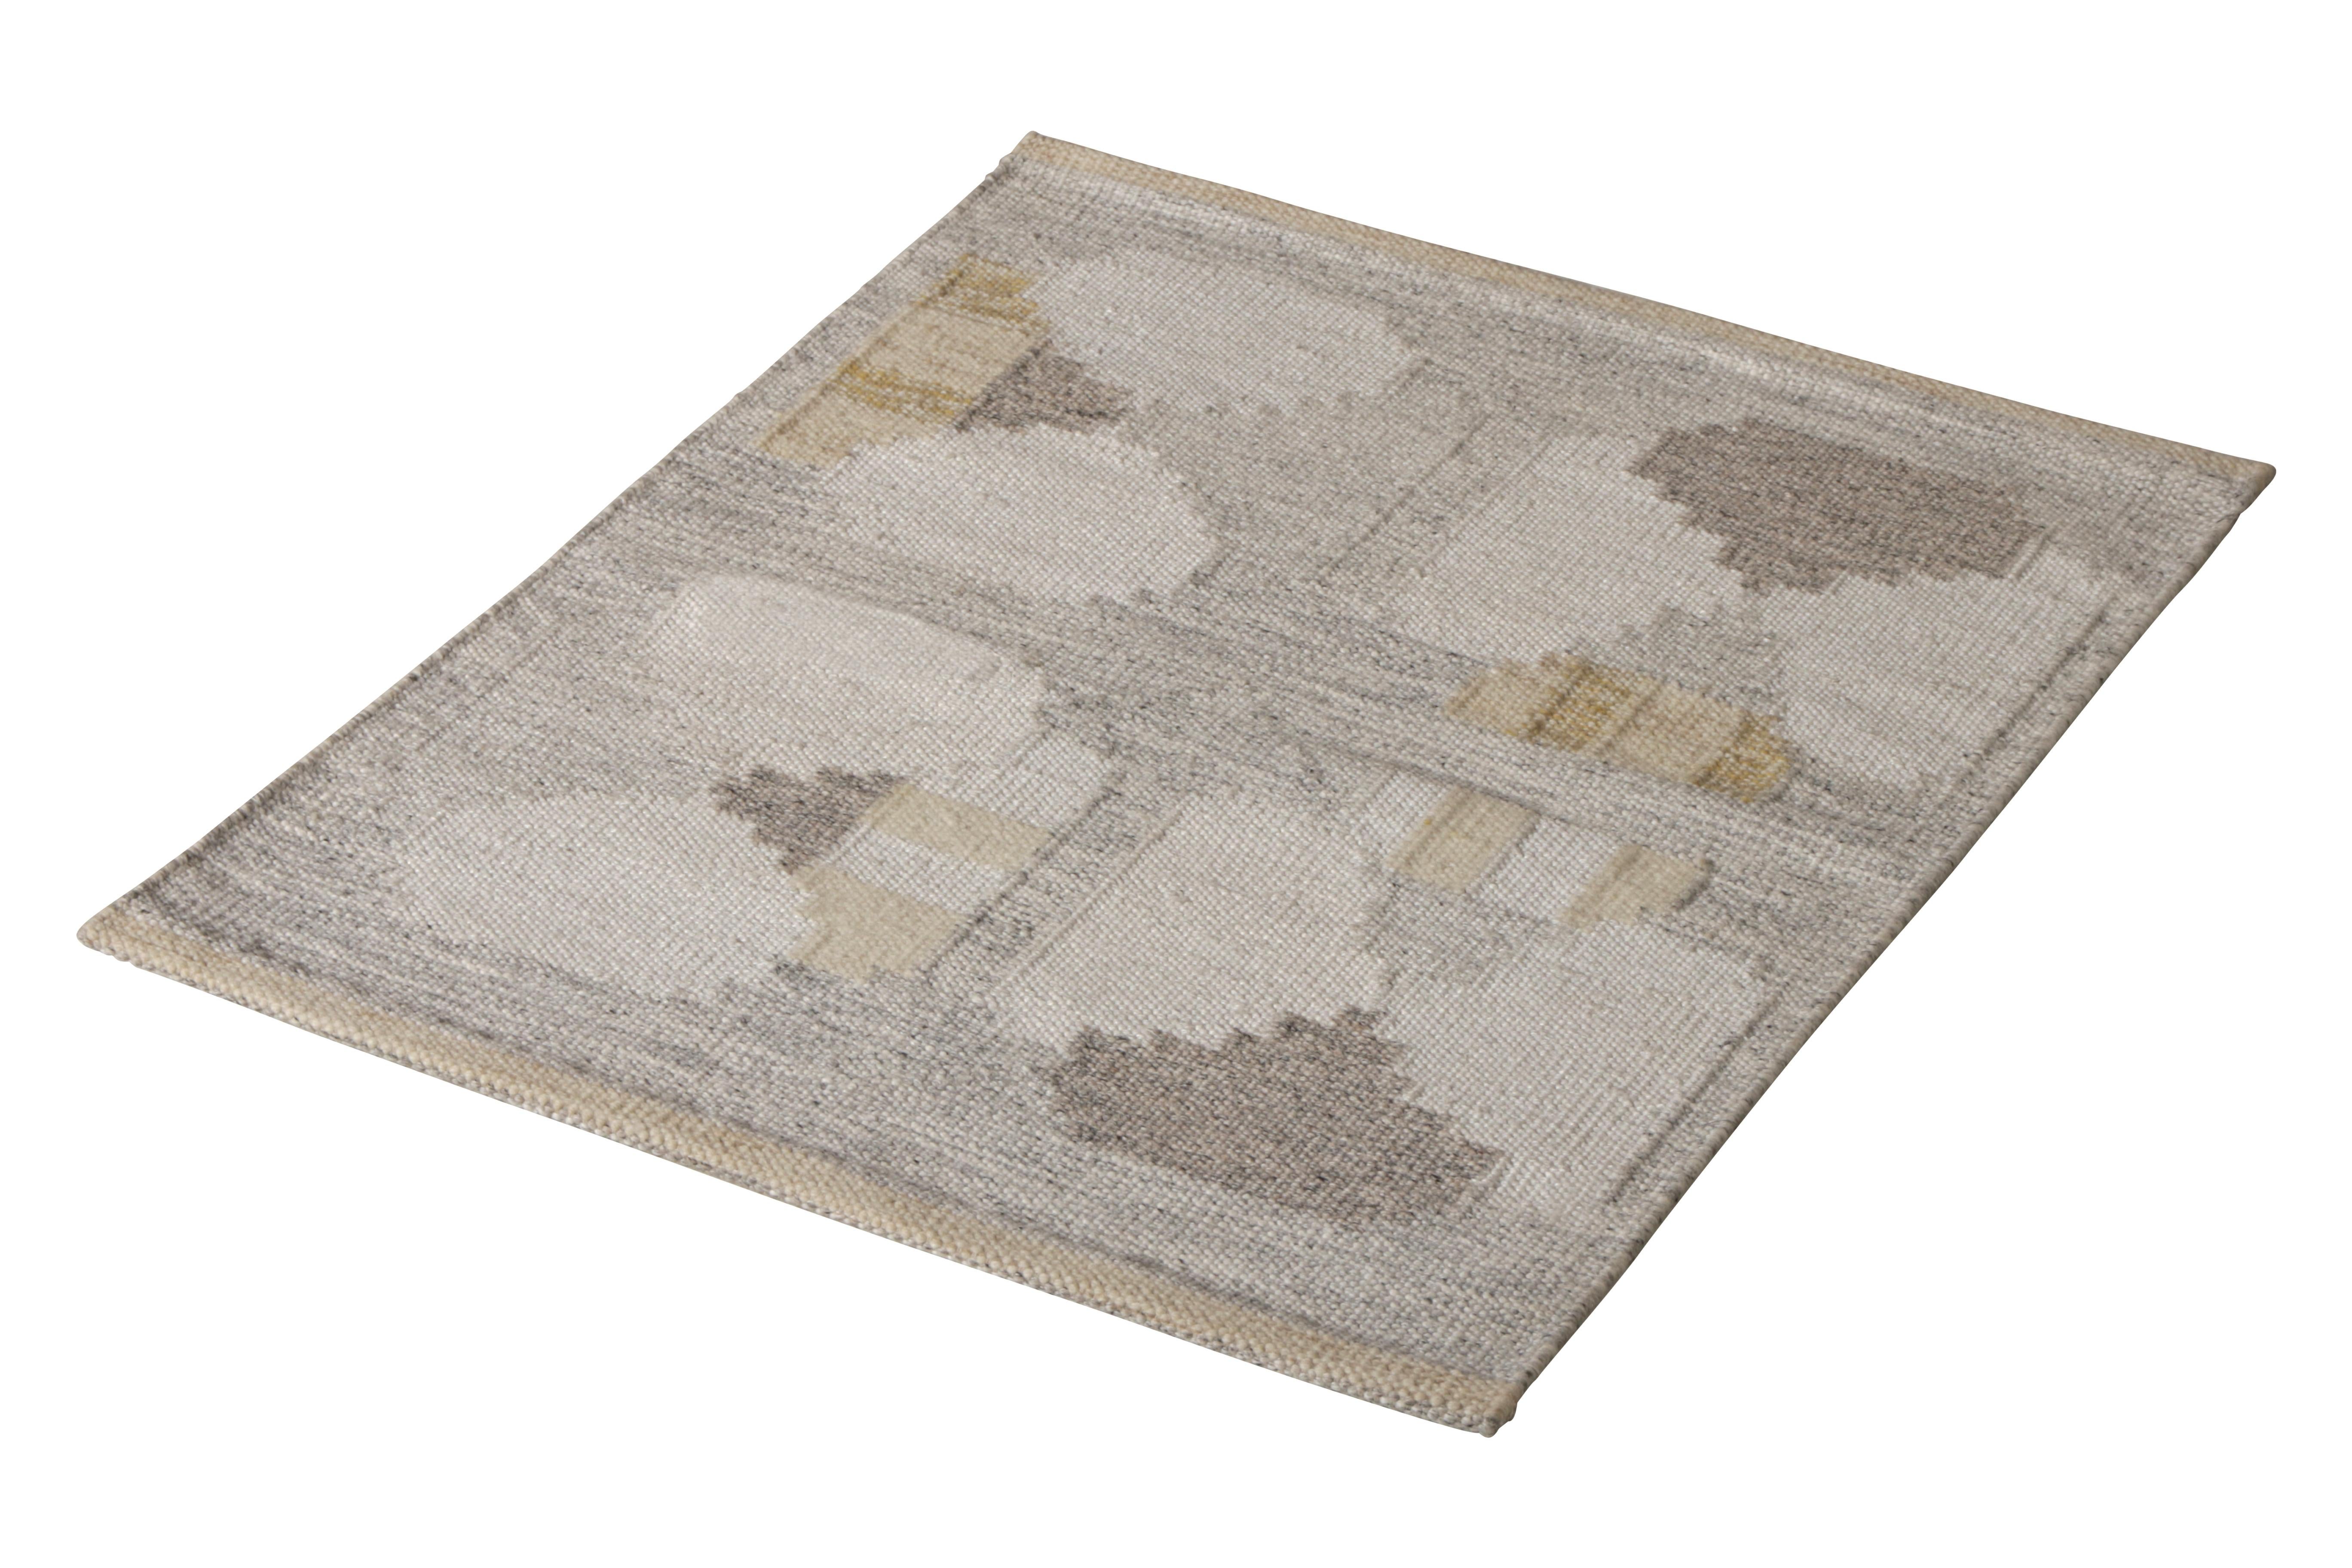 Handmade in a wool flat-weave originating from Rug & Kilim’s Scandinavian rug collection, this 3 x 4 Kilim rug enjoys a near square size in soothing vintage-style gray and beige-brown hues, complementing the chic geometric pattern and the smart,